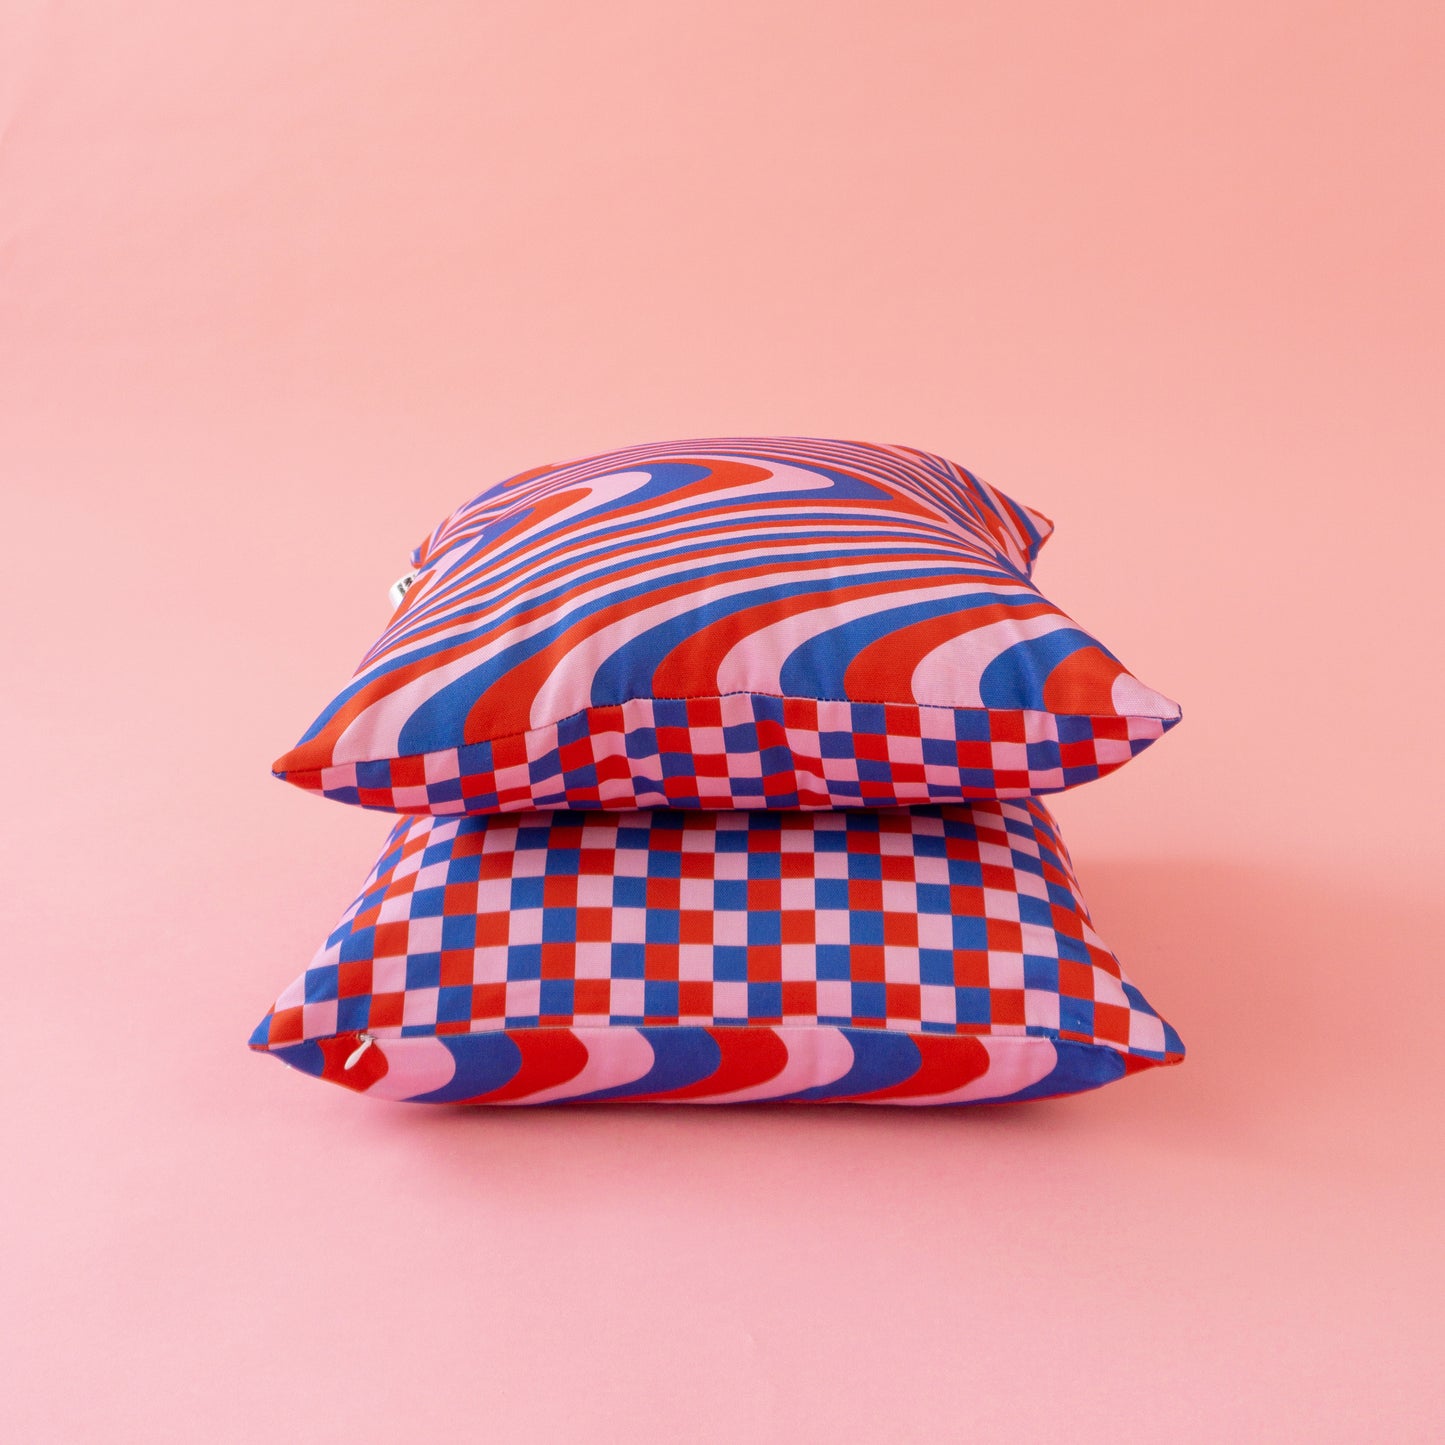 ★ COVER ONLY ★ Red & Blue Cushion